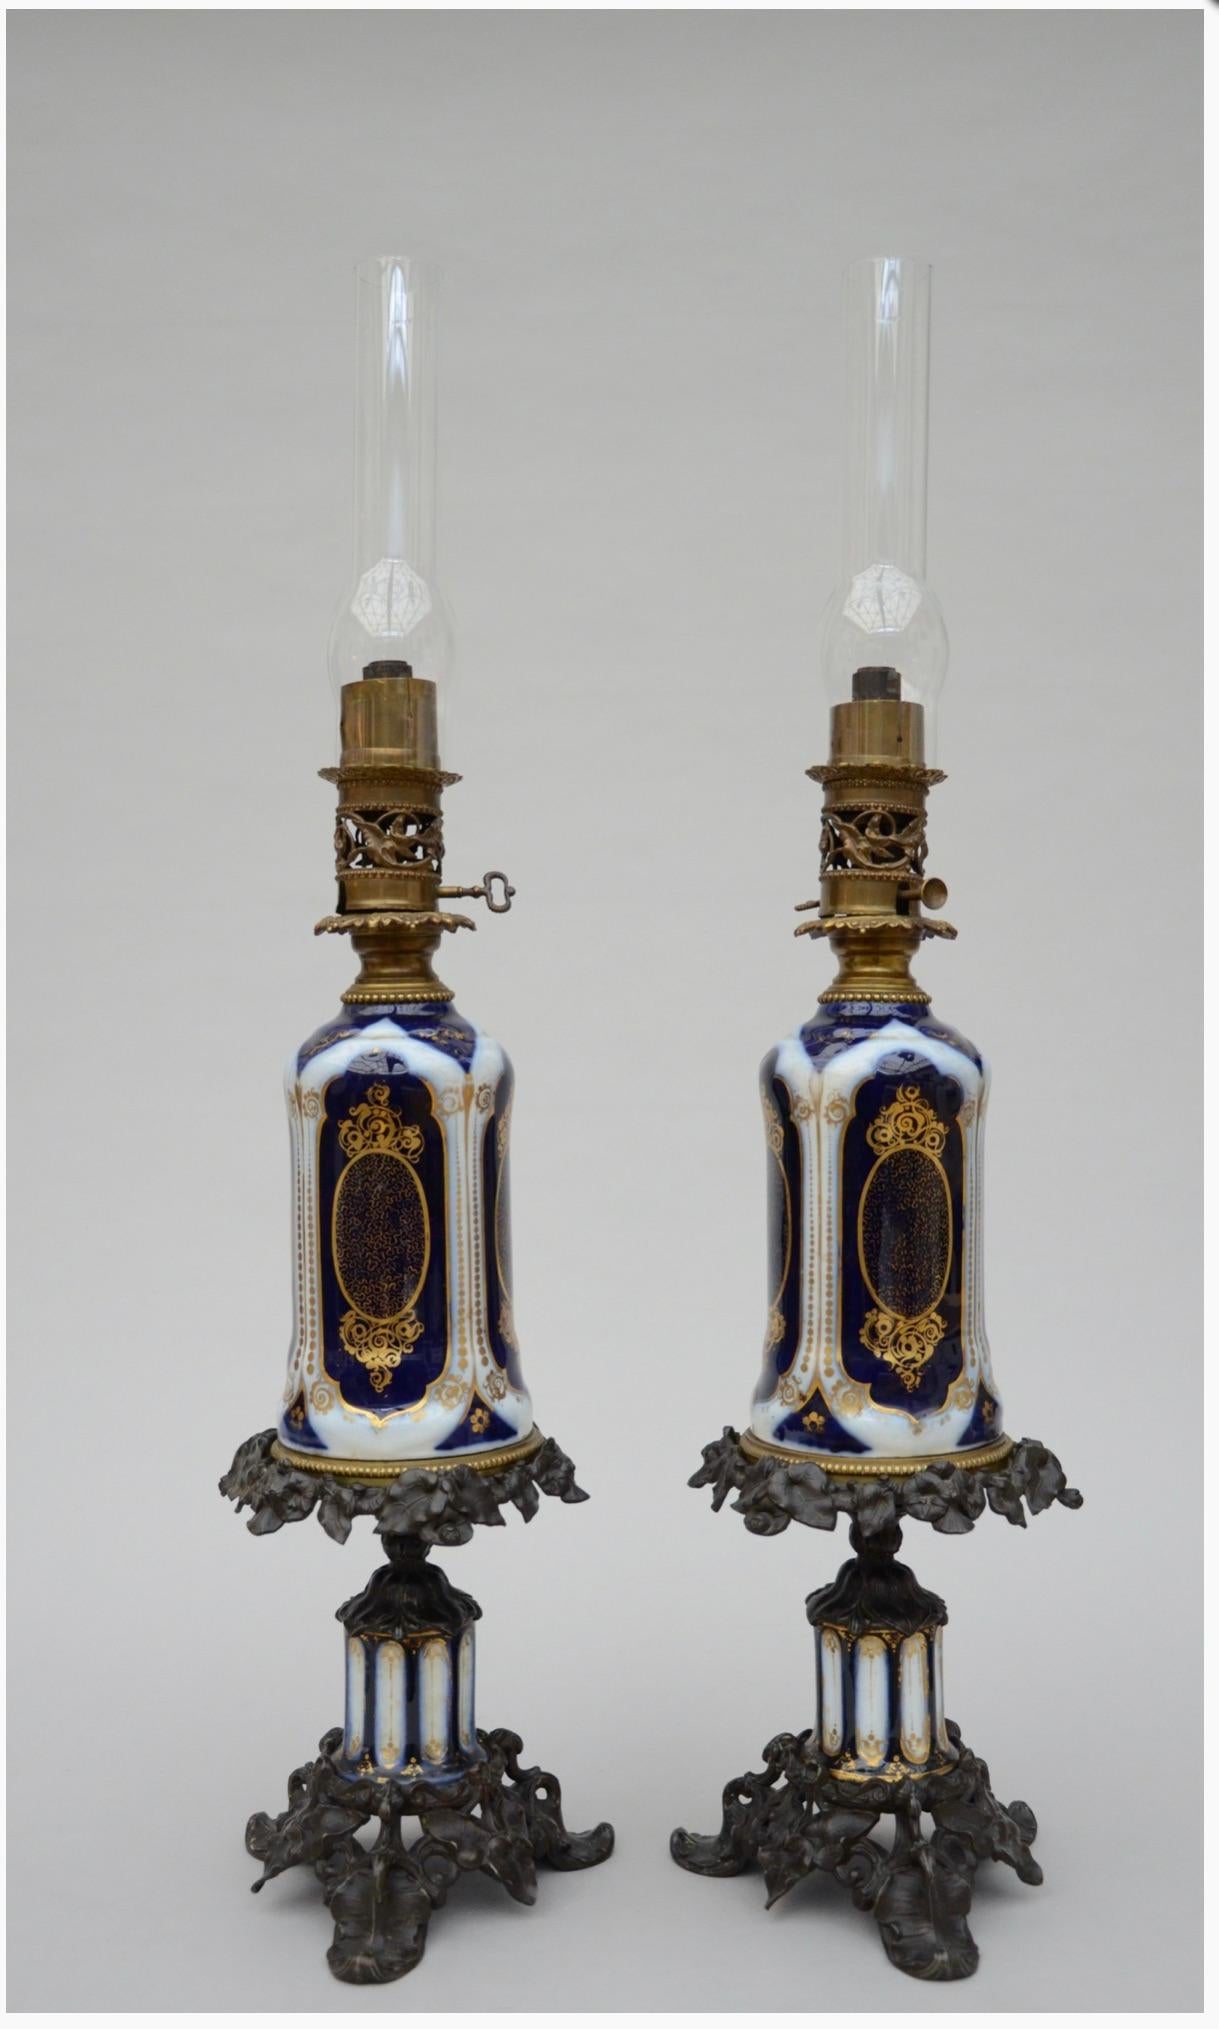 A pair of Bayeux oil lamps with bronze mounts.

A pair of antique French oil lamps in hand painted Bayeux porcelain.
Colors used is typical Bayeux porcelain.

Height with glass 33.8